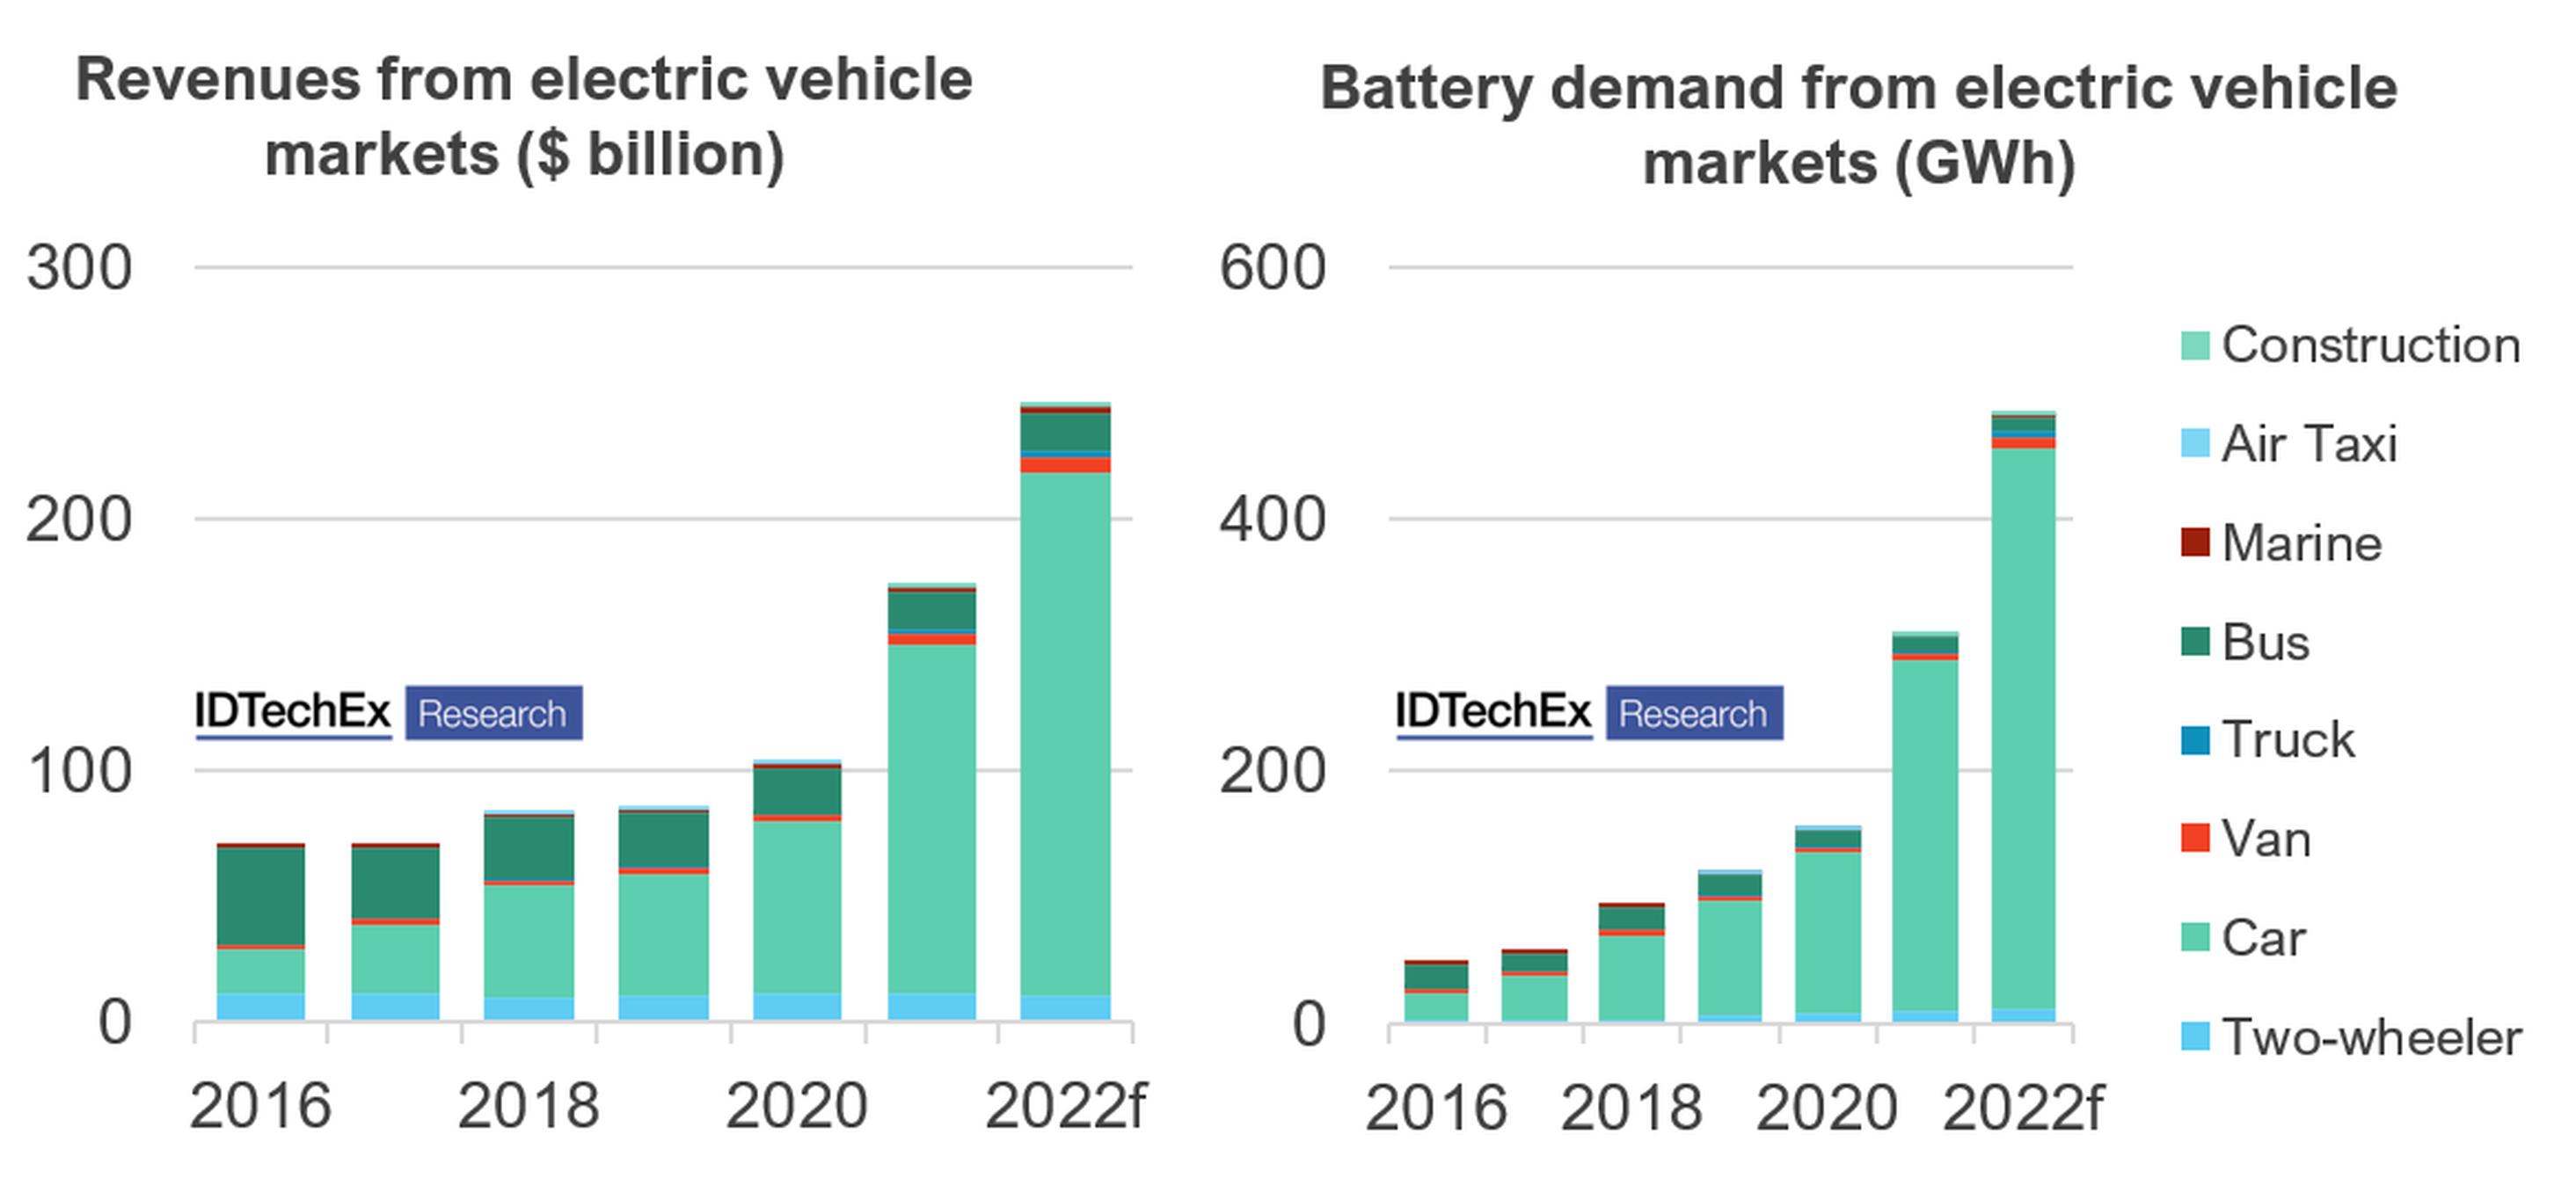 Source: IDTechEx report Electric Vehicles Land, Sea & Air 2022-2042